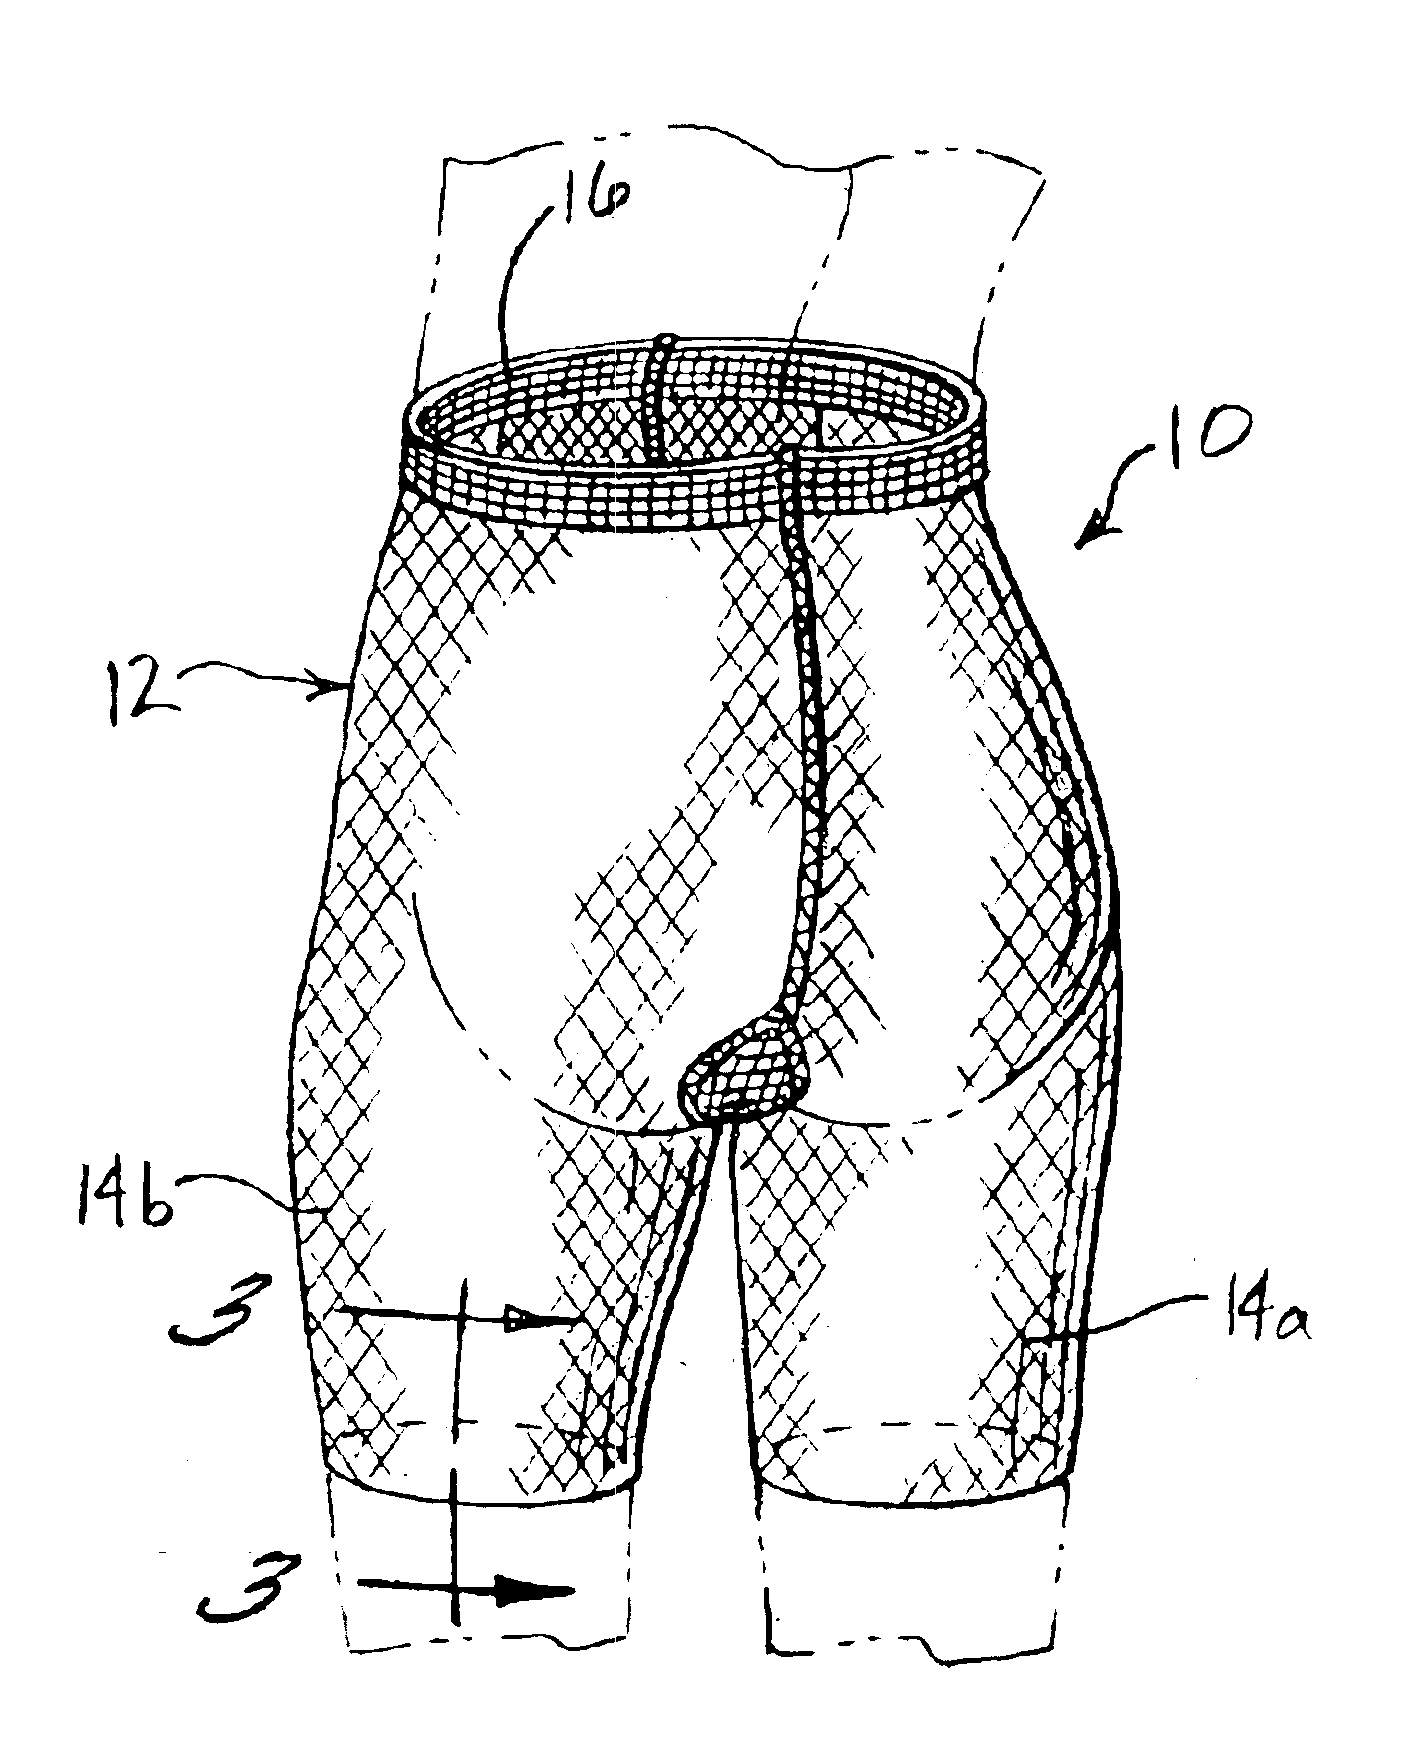 Two-ply body-smoothing undergarment